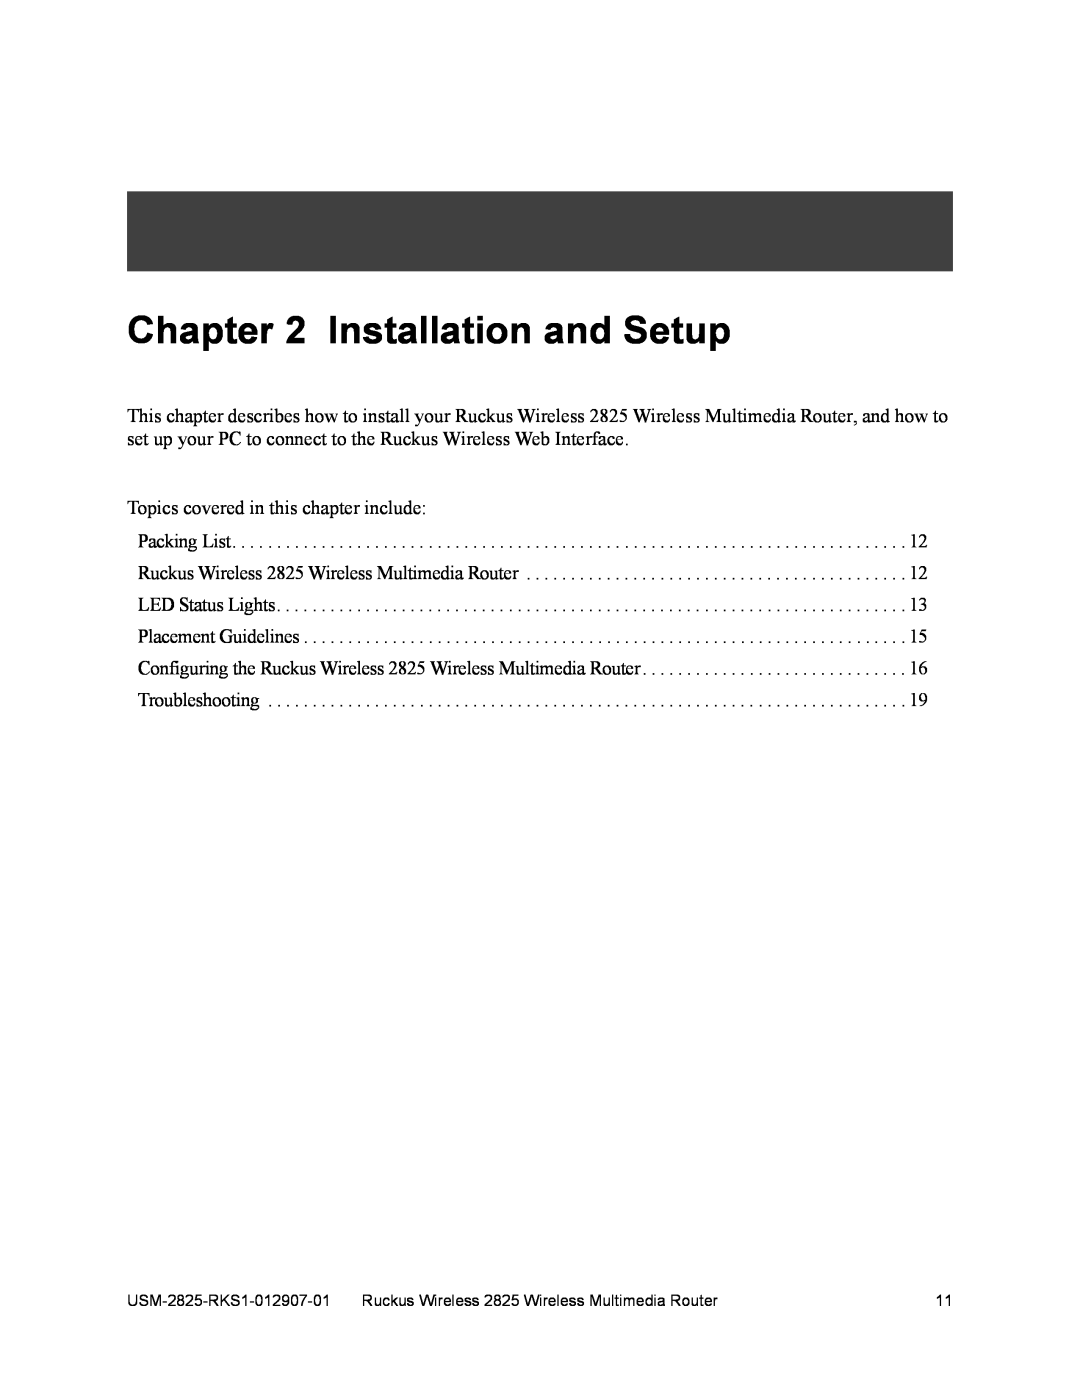 Ruckus Wireless 2111, 2825 manual Installation and Setup, Topics covered in this chapter include 